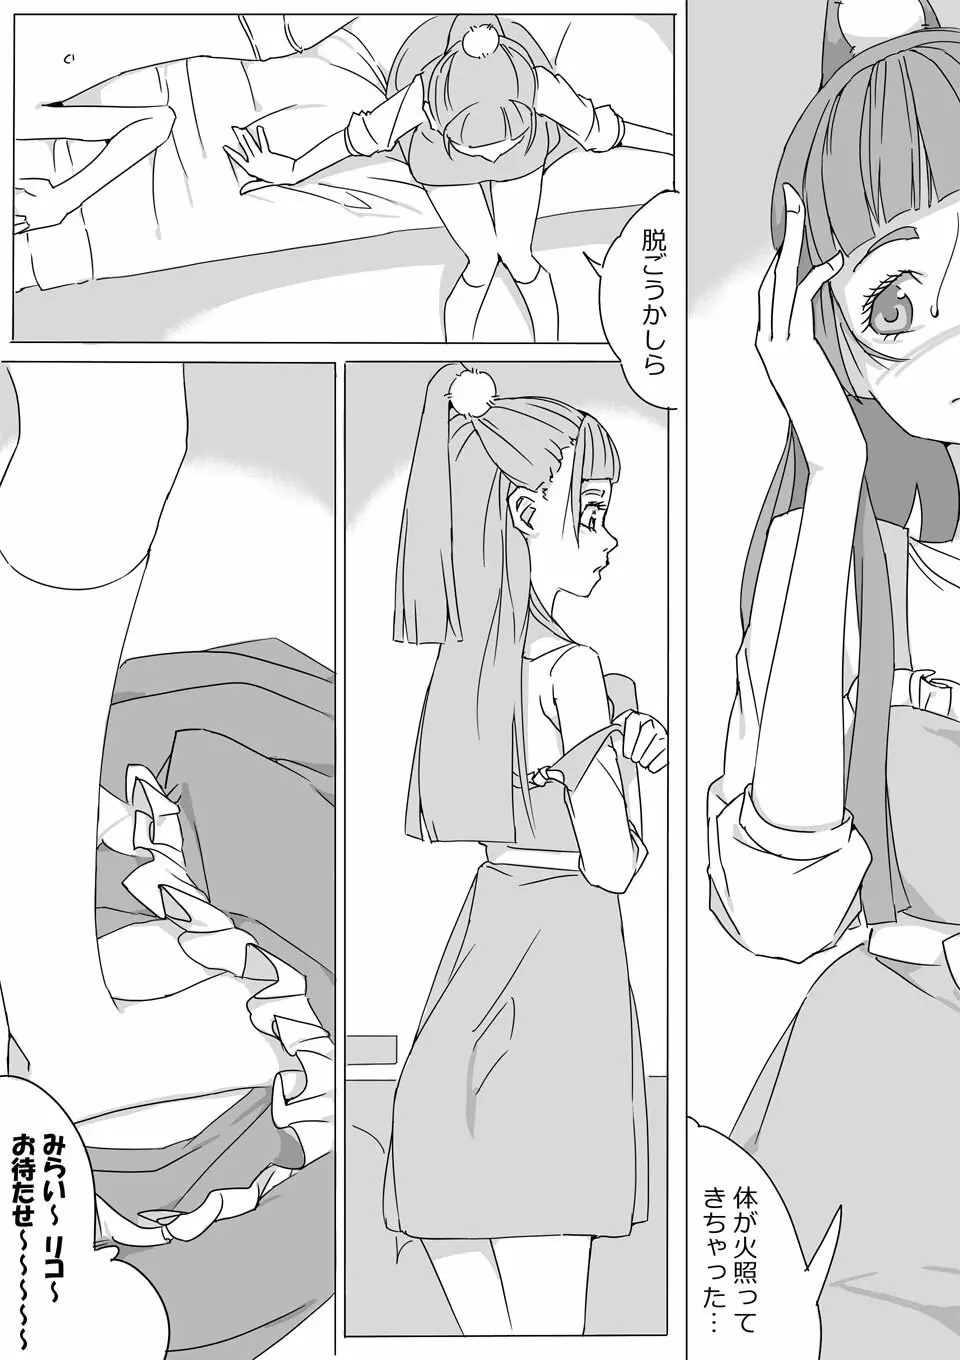 Untitled Precure Doujinshi - page12